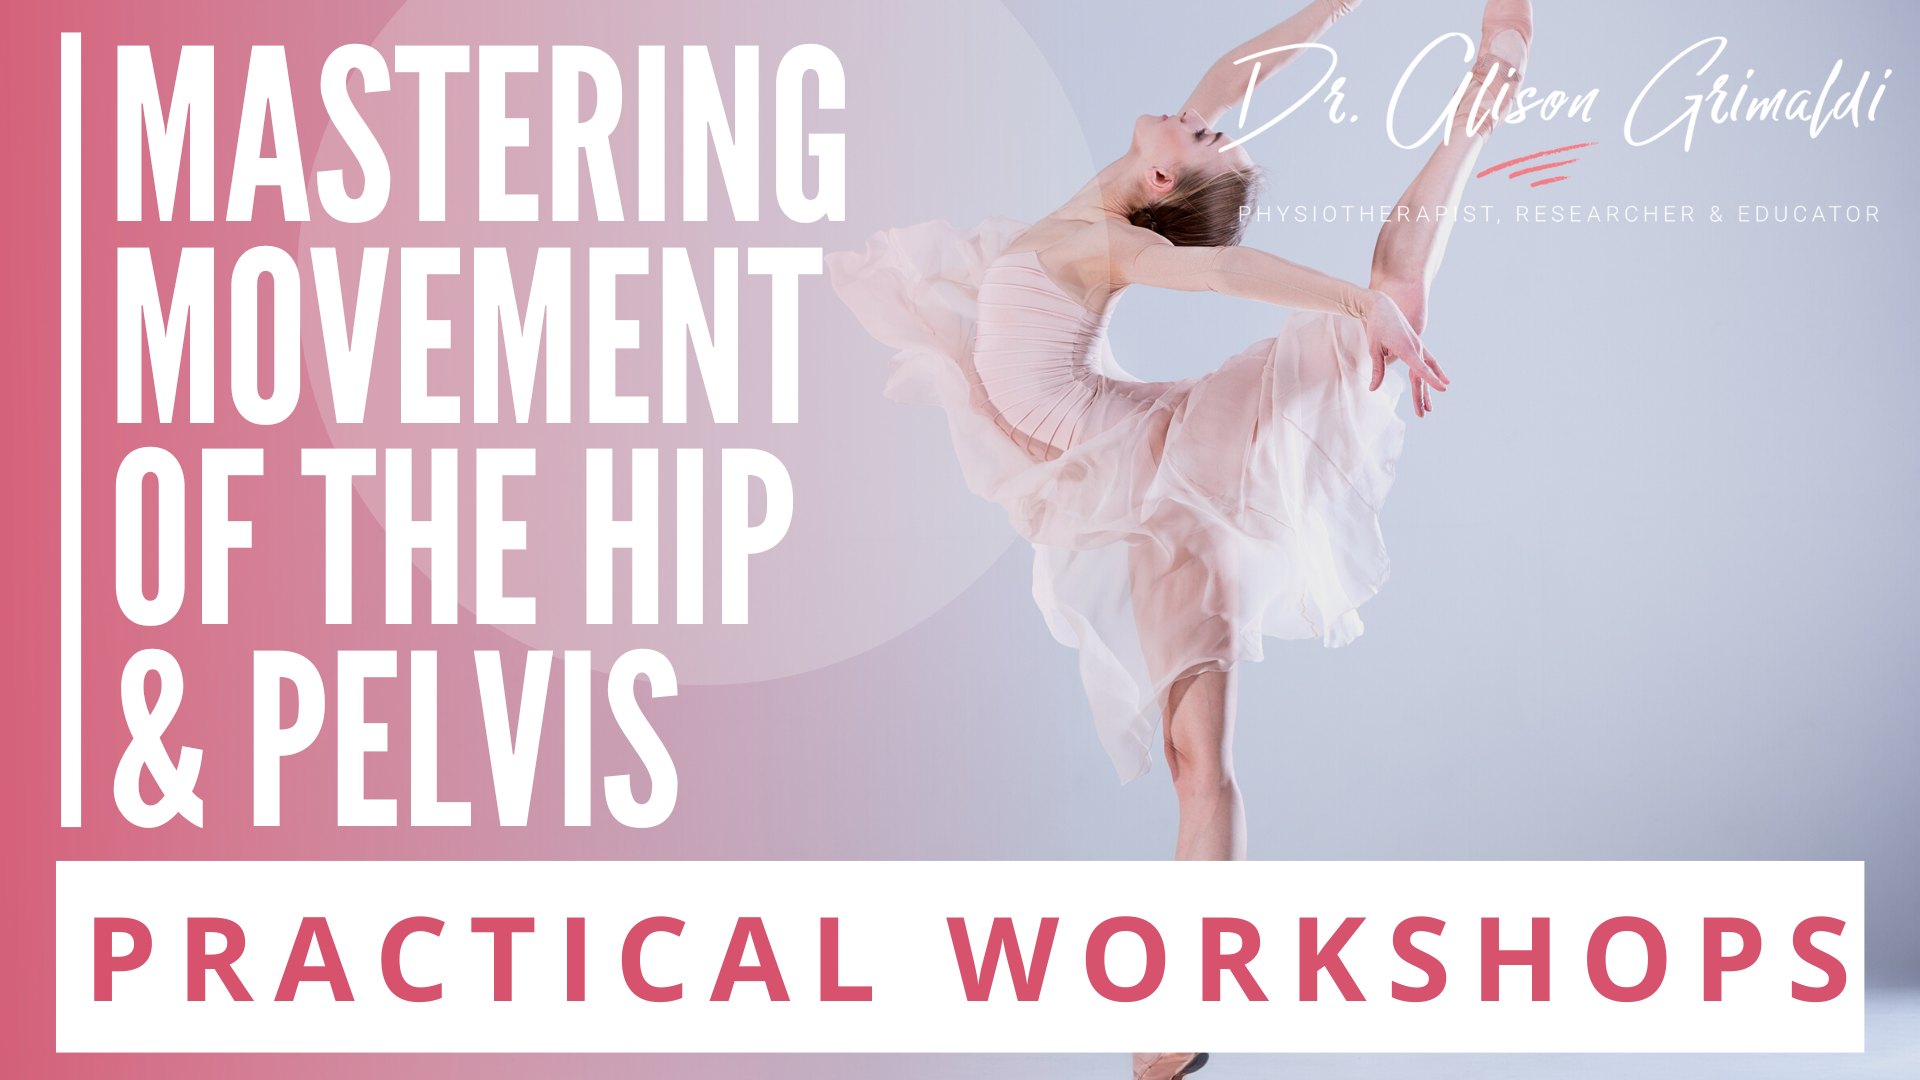 mastering-movement-of-the-hip-and-pelvis-practical-workshops